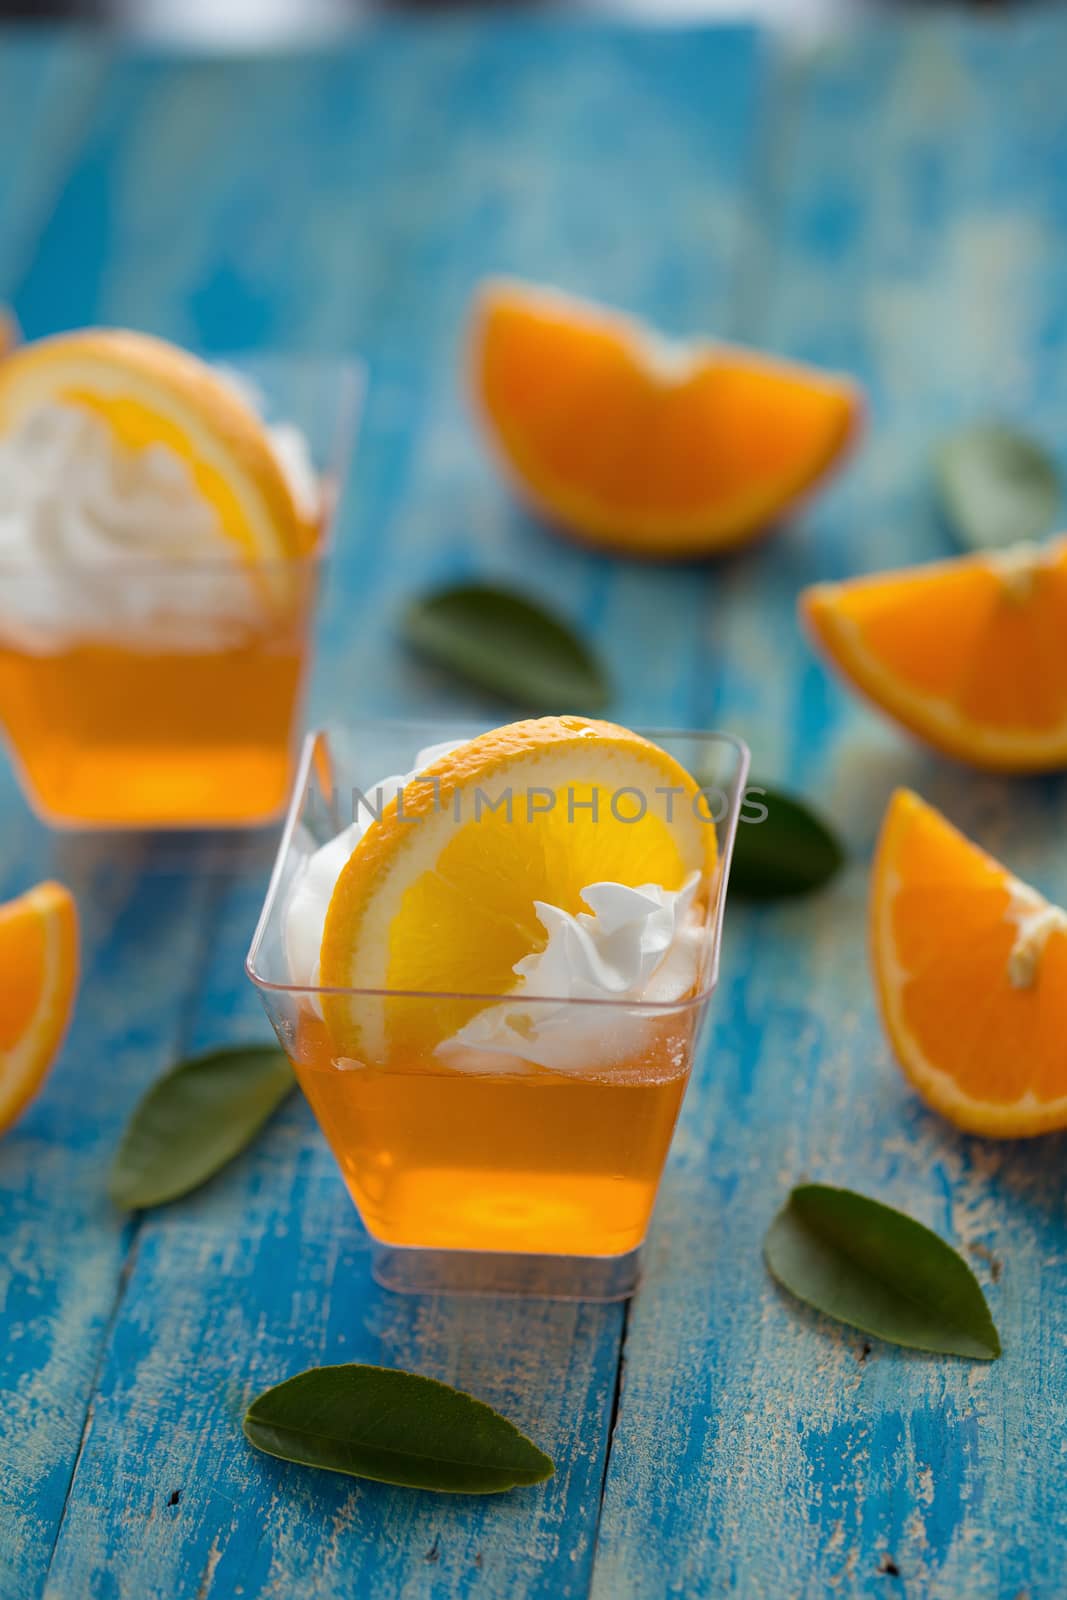 Orange jelly in a cup with whipped cream and orange sliced on bl by kaiskynet